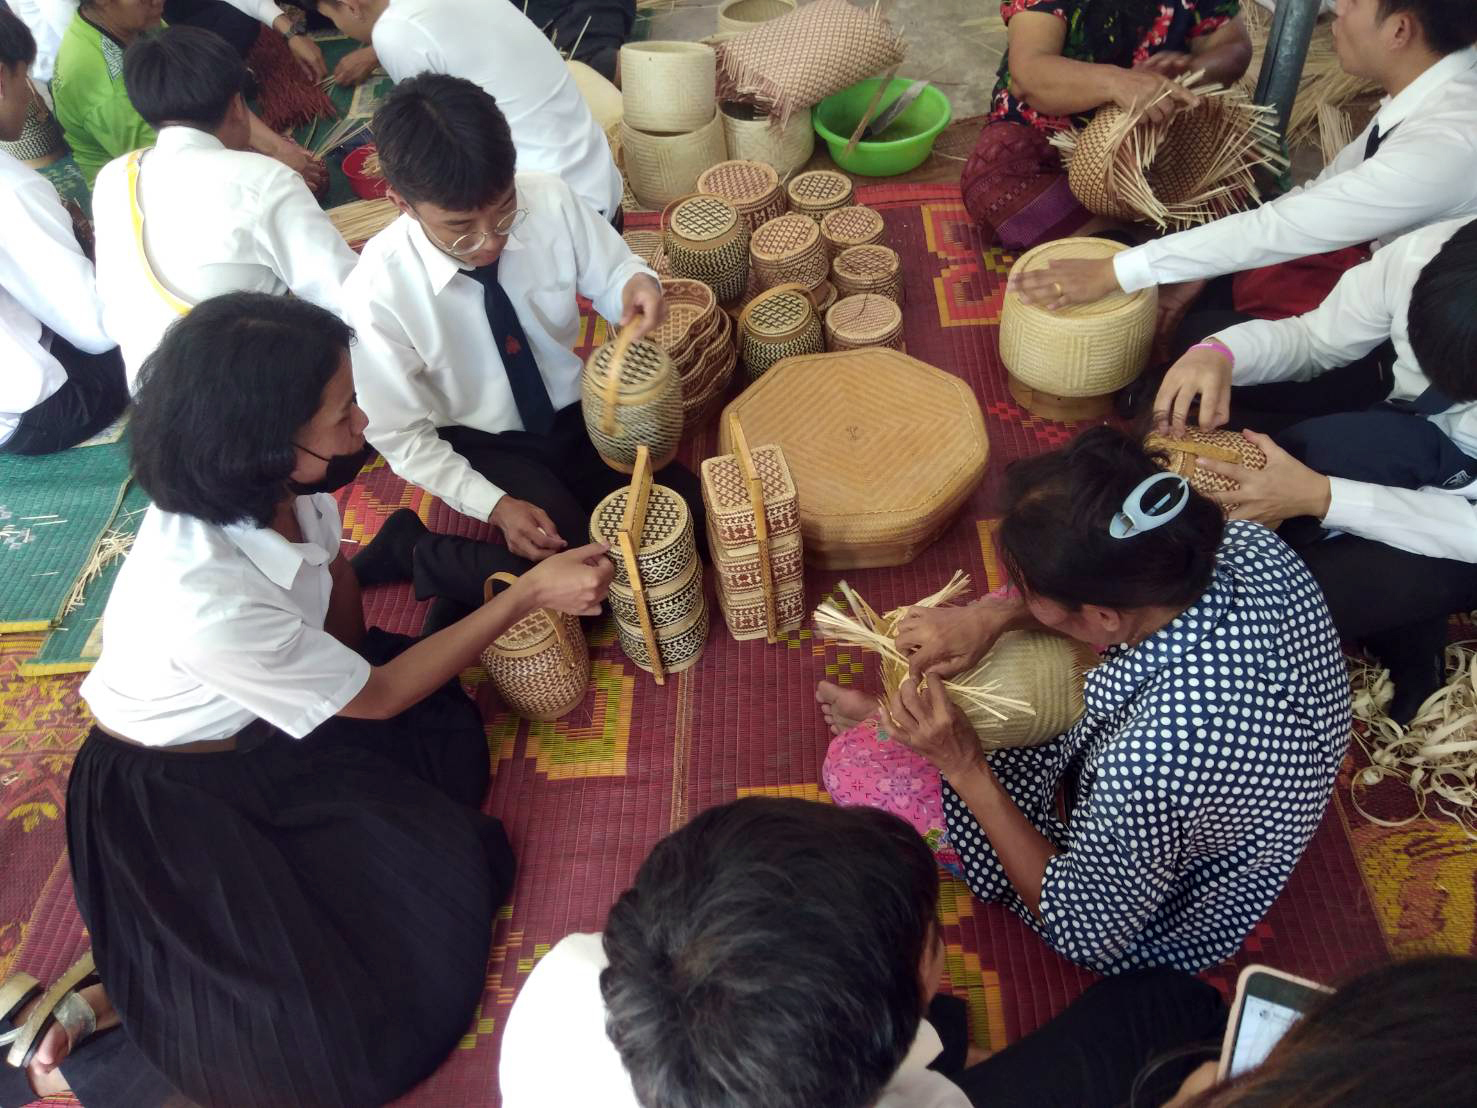 KKU Culture Center fires students up for creativity of Isan culture